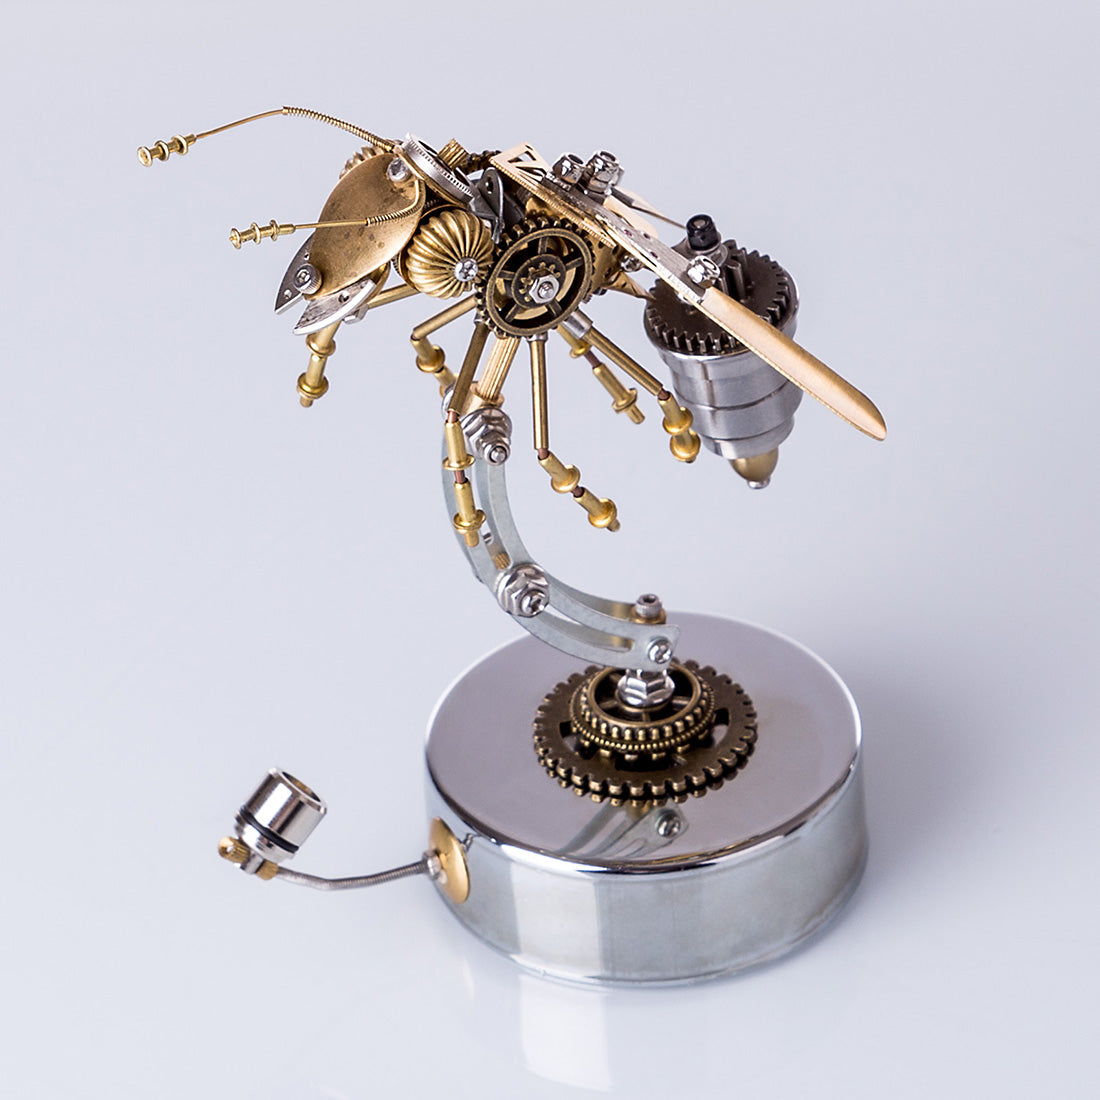 Steampunk Metal Brass Wasp Bug Model  Insect with Light Handmade Assembly Crafts